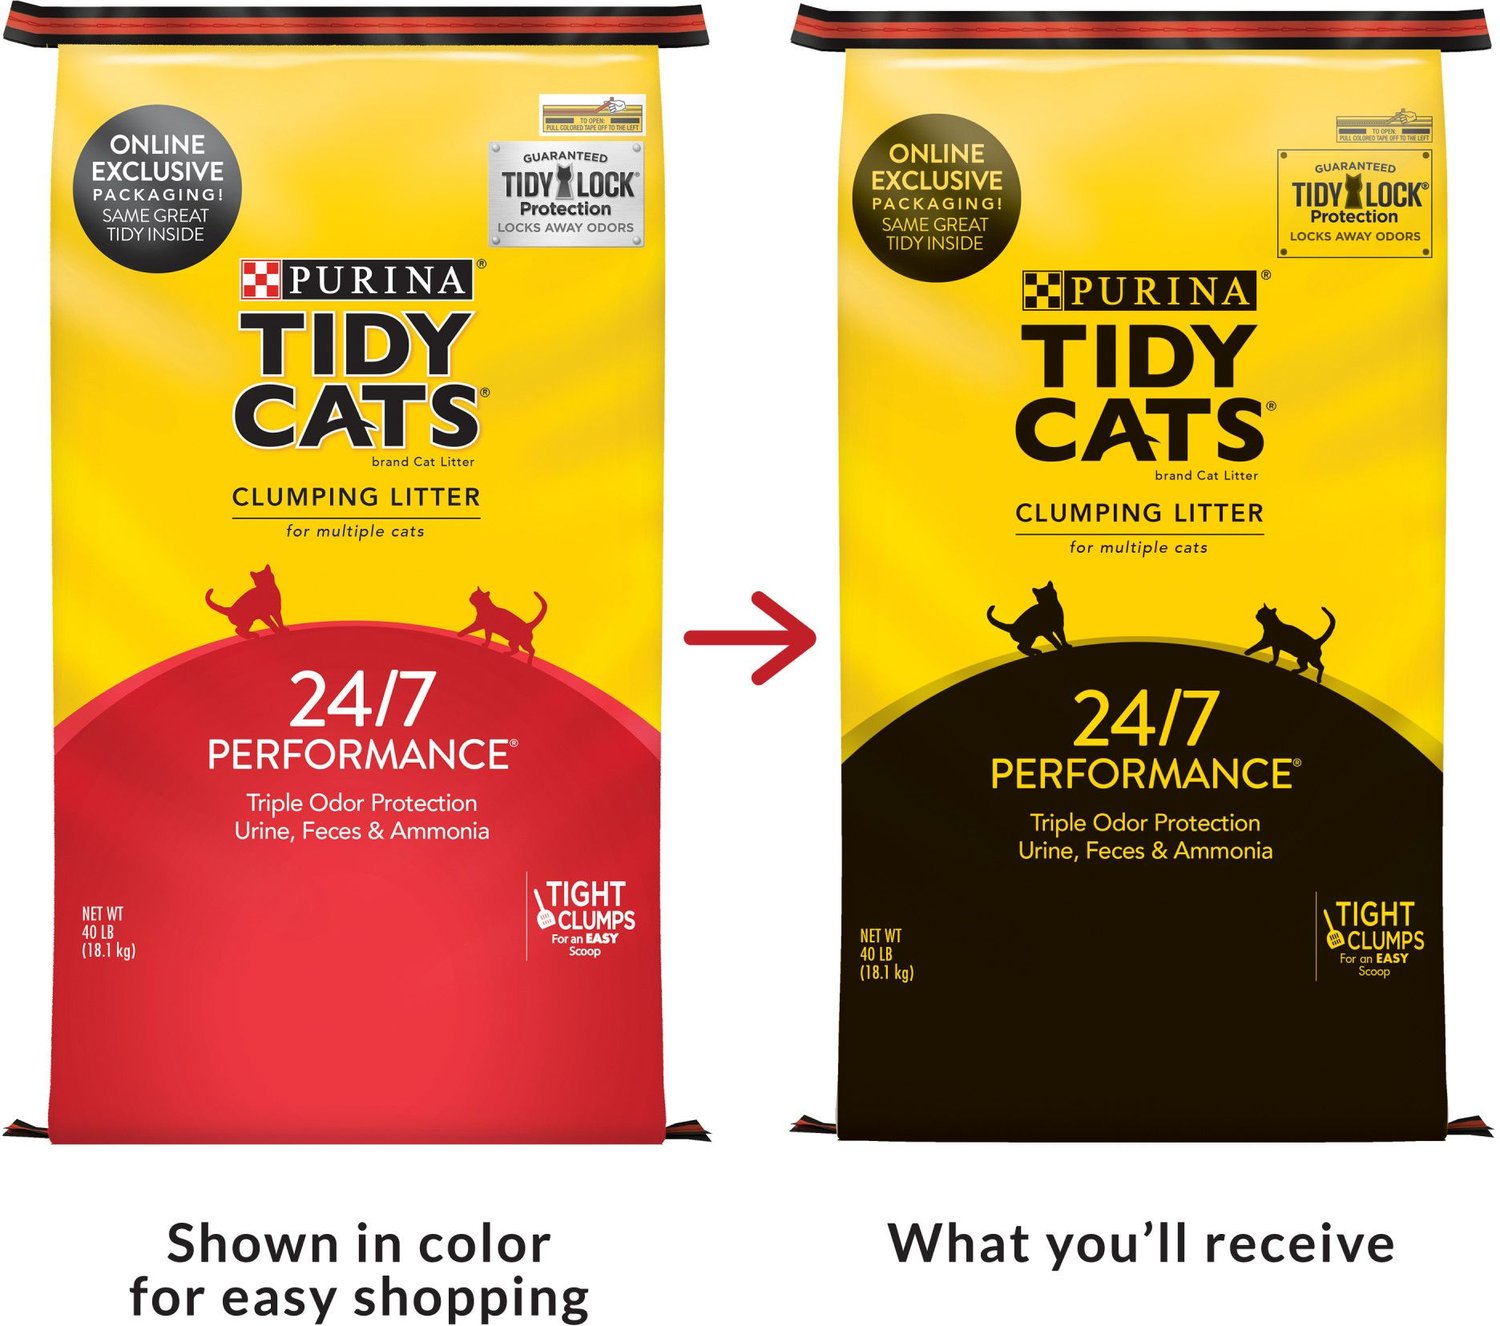 TIDY CATS 24/7 Performance Scented Clumping Clay Cat Litter, 40lb bag